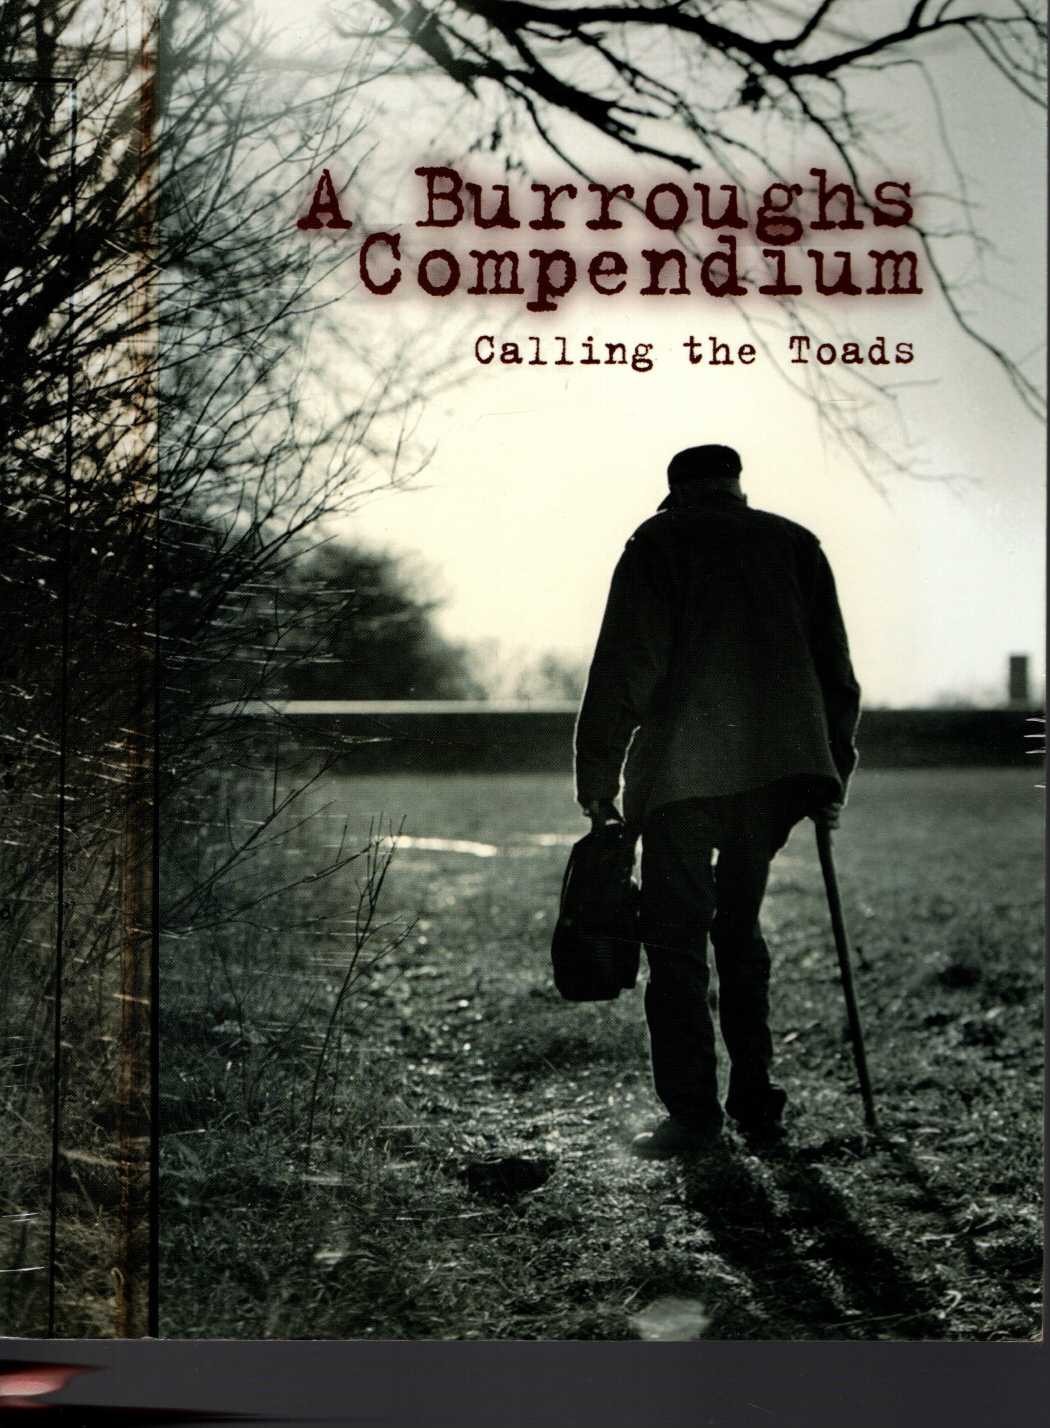 (Various editors and contributors) A BURROUGHS COMPENDIUM. Calling the Toads front book cover image